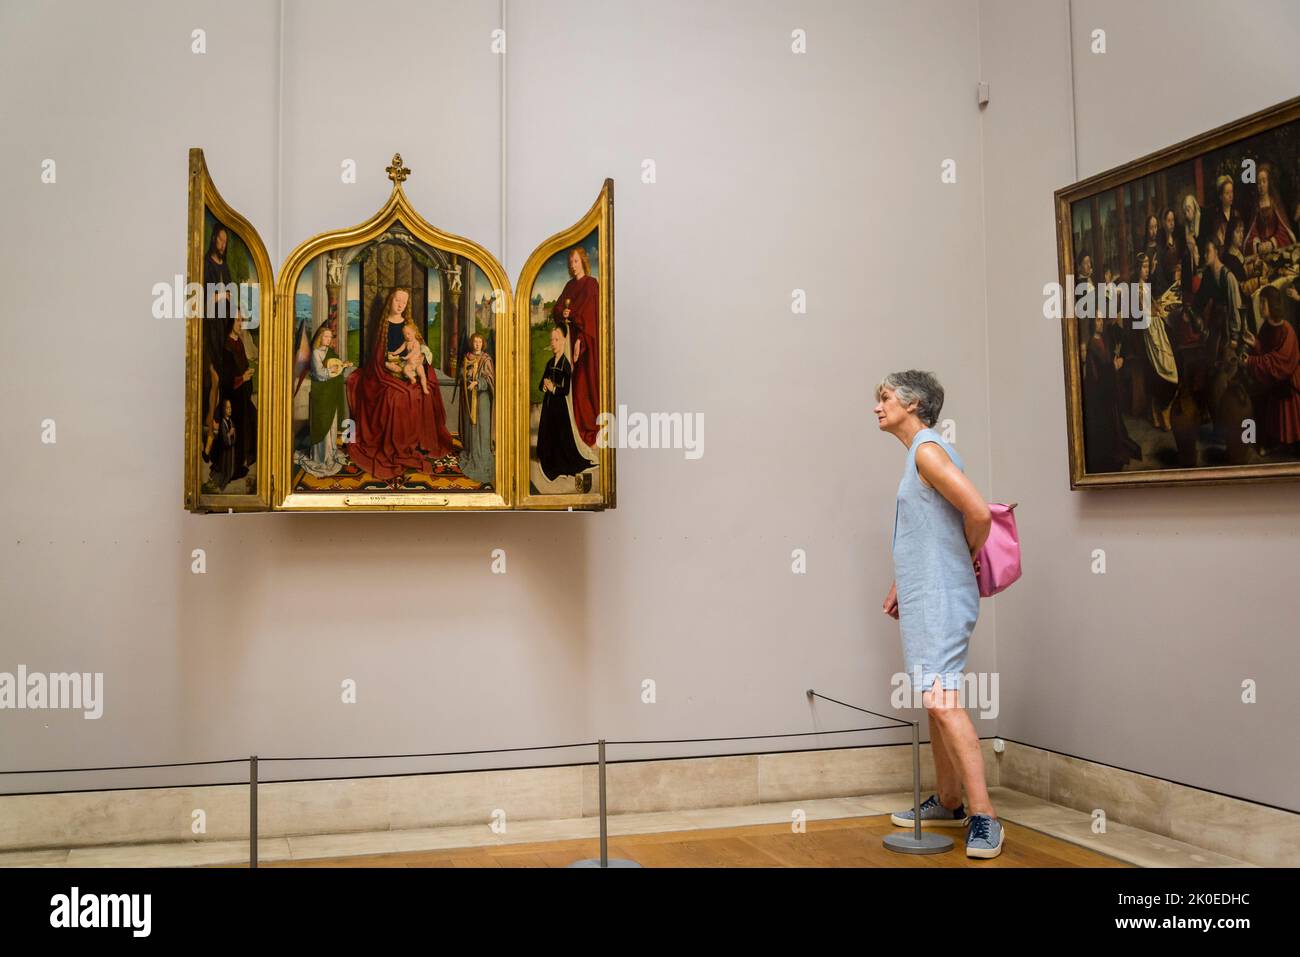 'Annunciation' triptych, 15th century Dutch religious art, Louvre Museum, the world's most-visited museum, and a historic landmark in Paris, France. I Stock Photo